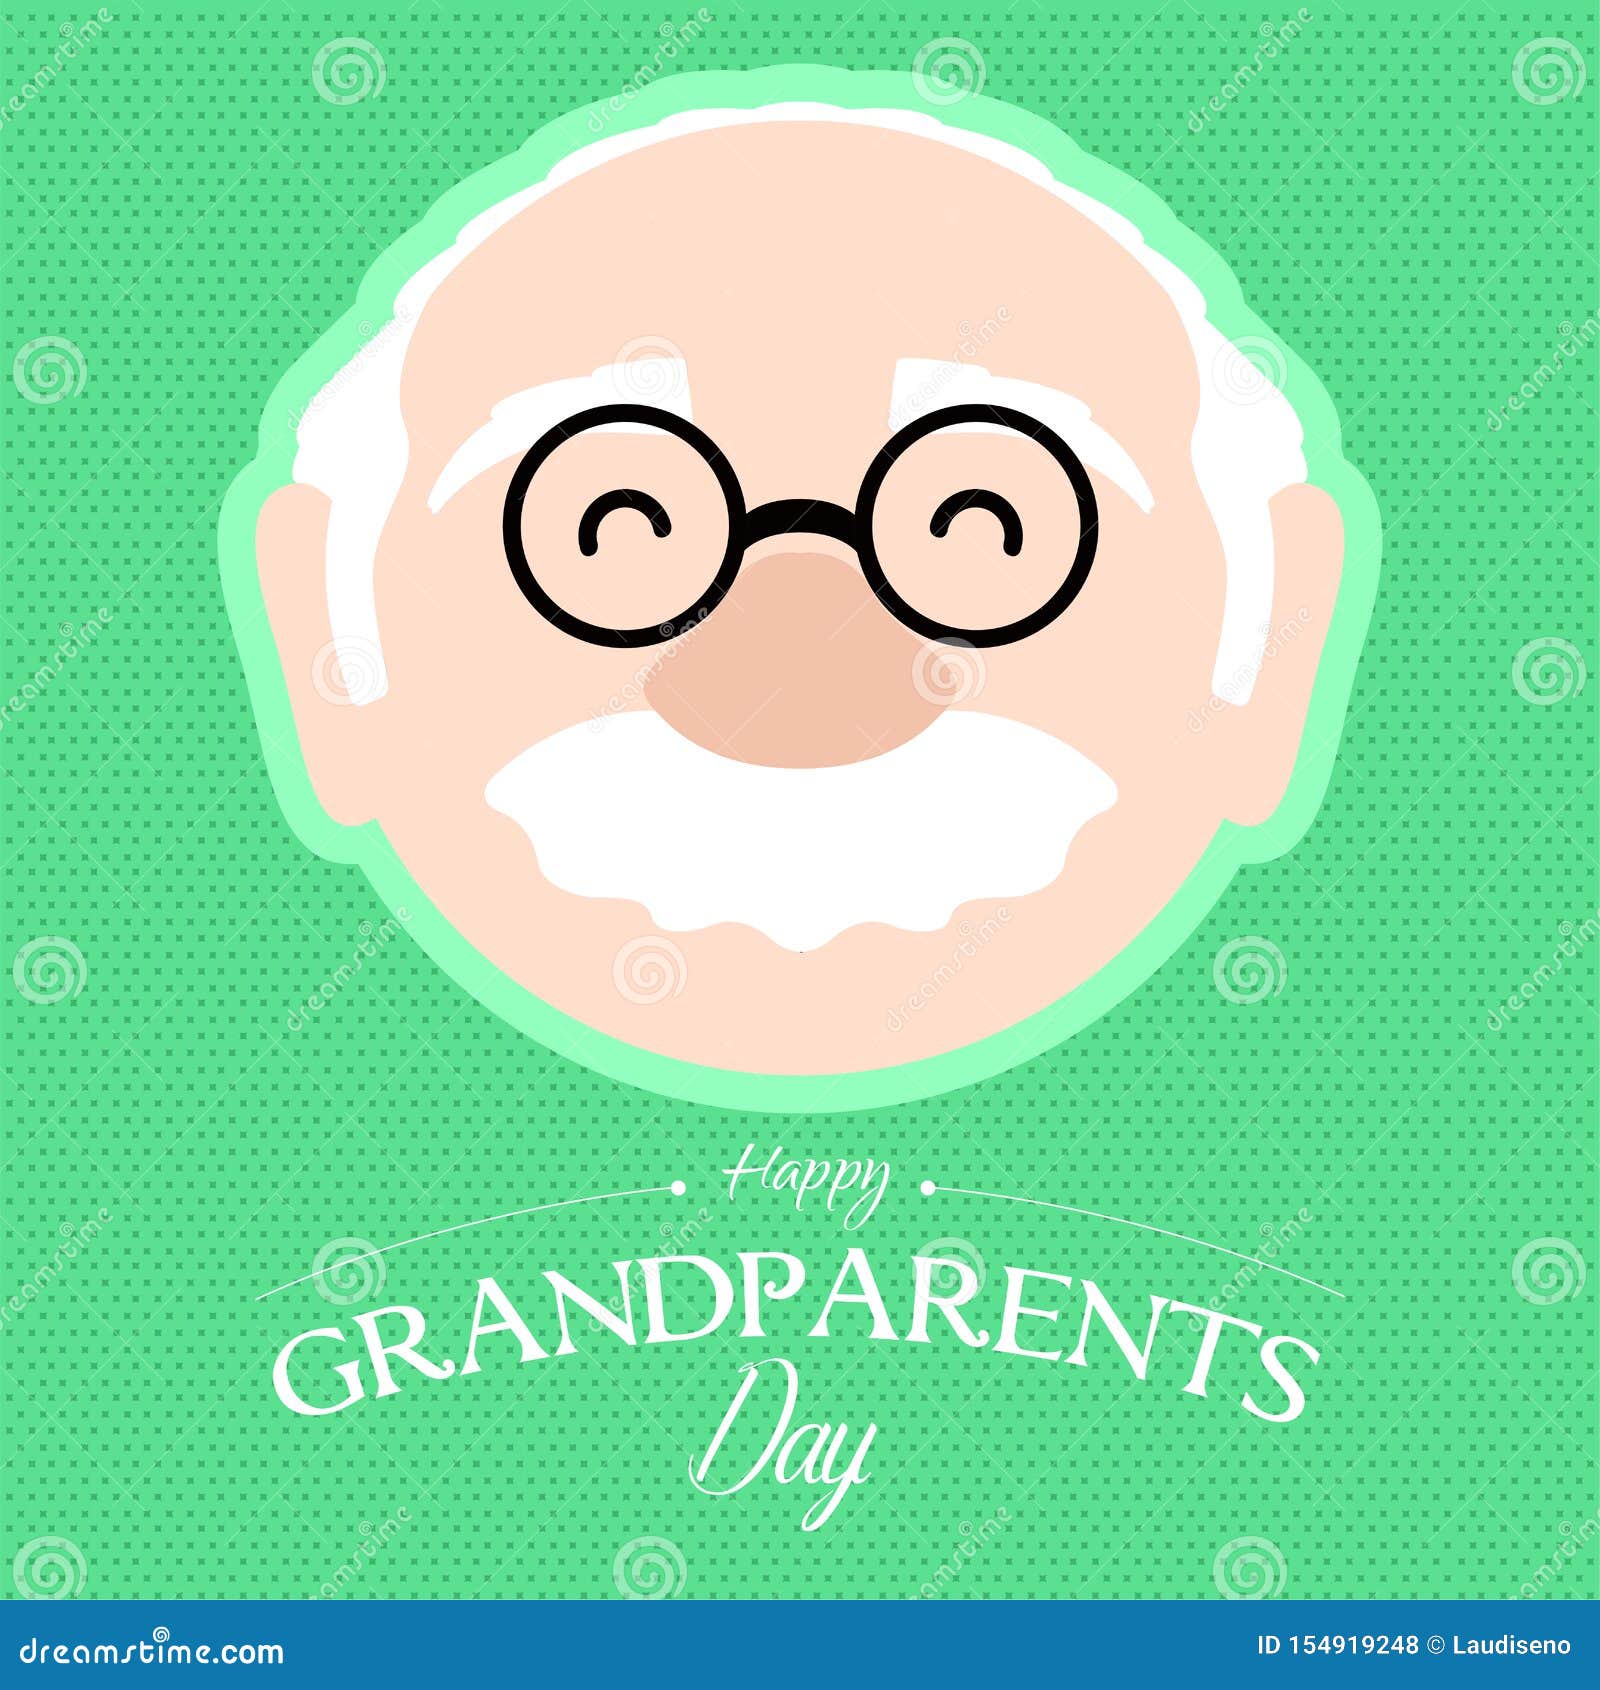 Download Happy Grandparents Day Stock Vector Illustration Of Holiday 154919248